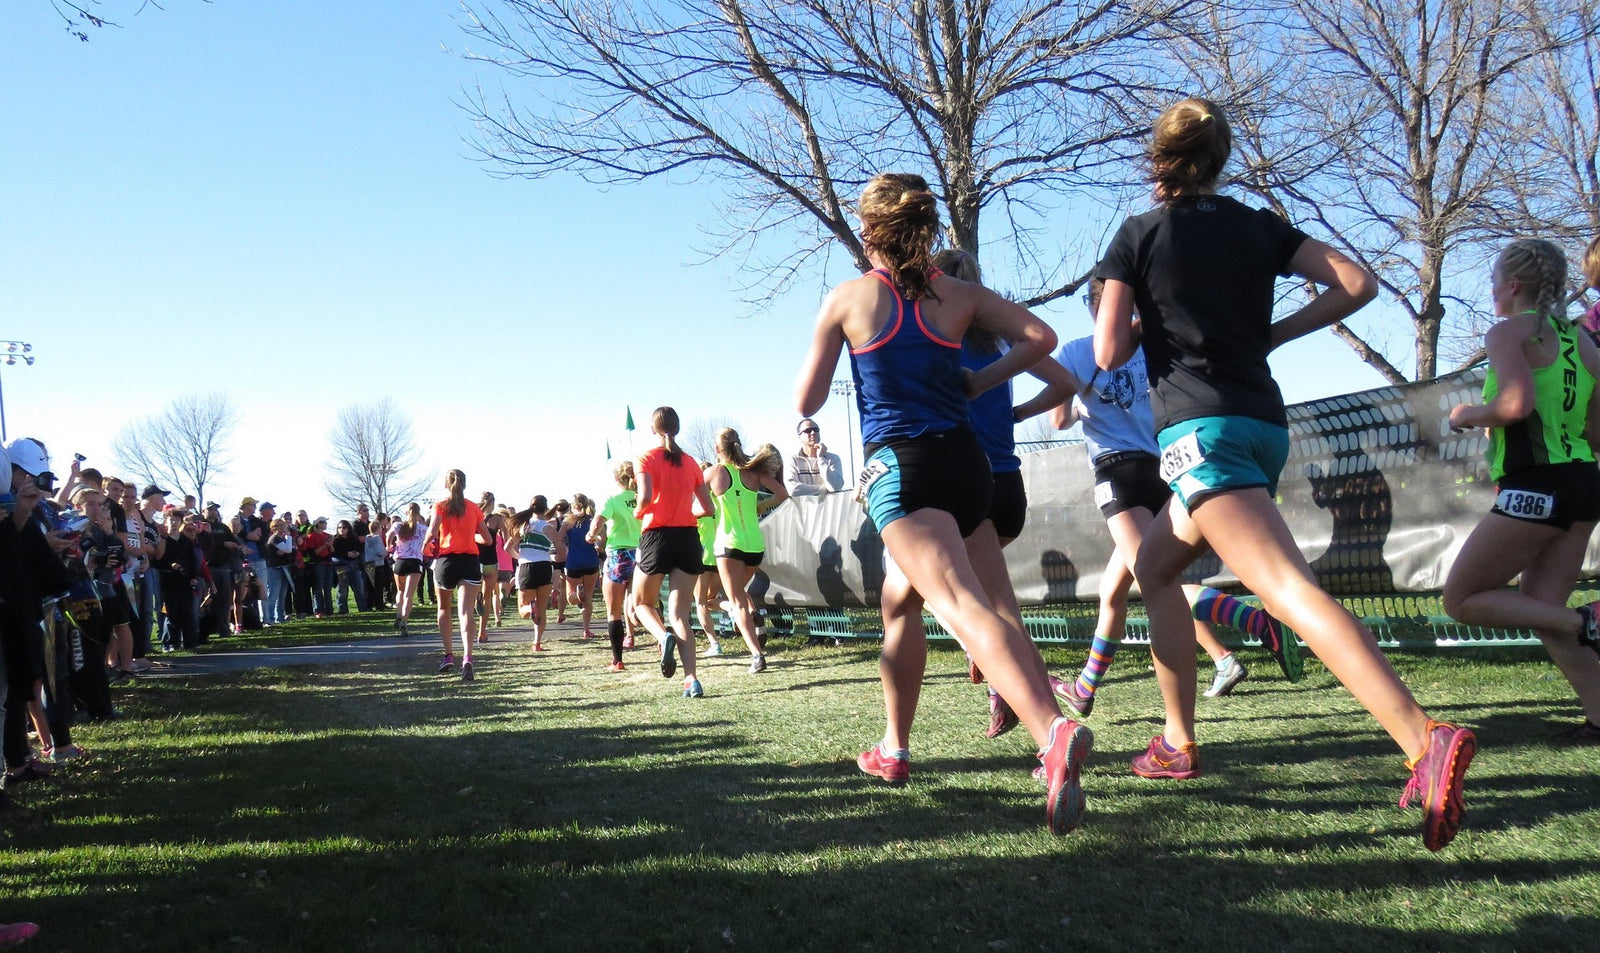 Runners racing in the park